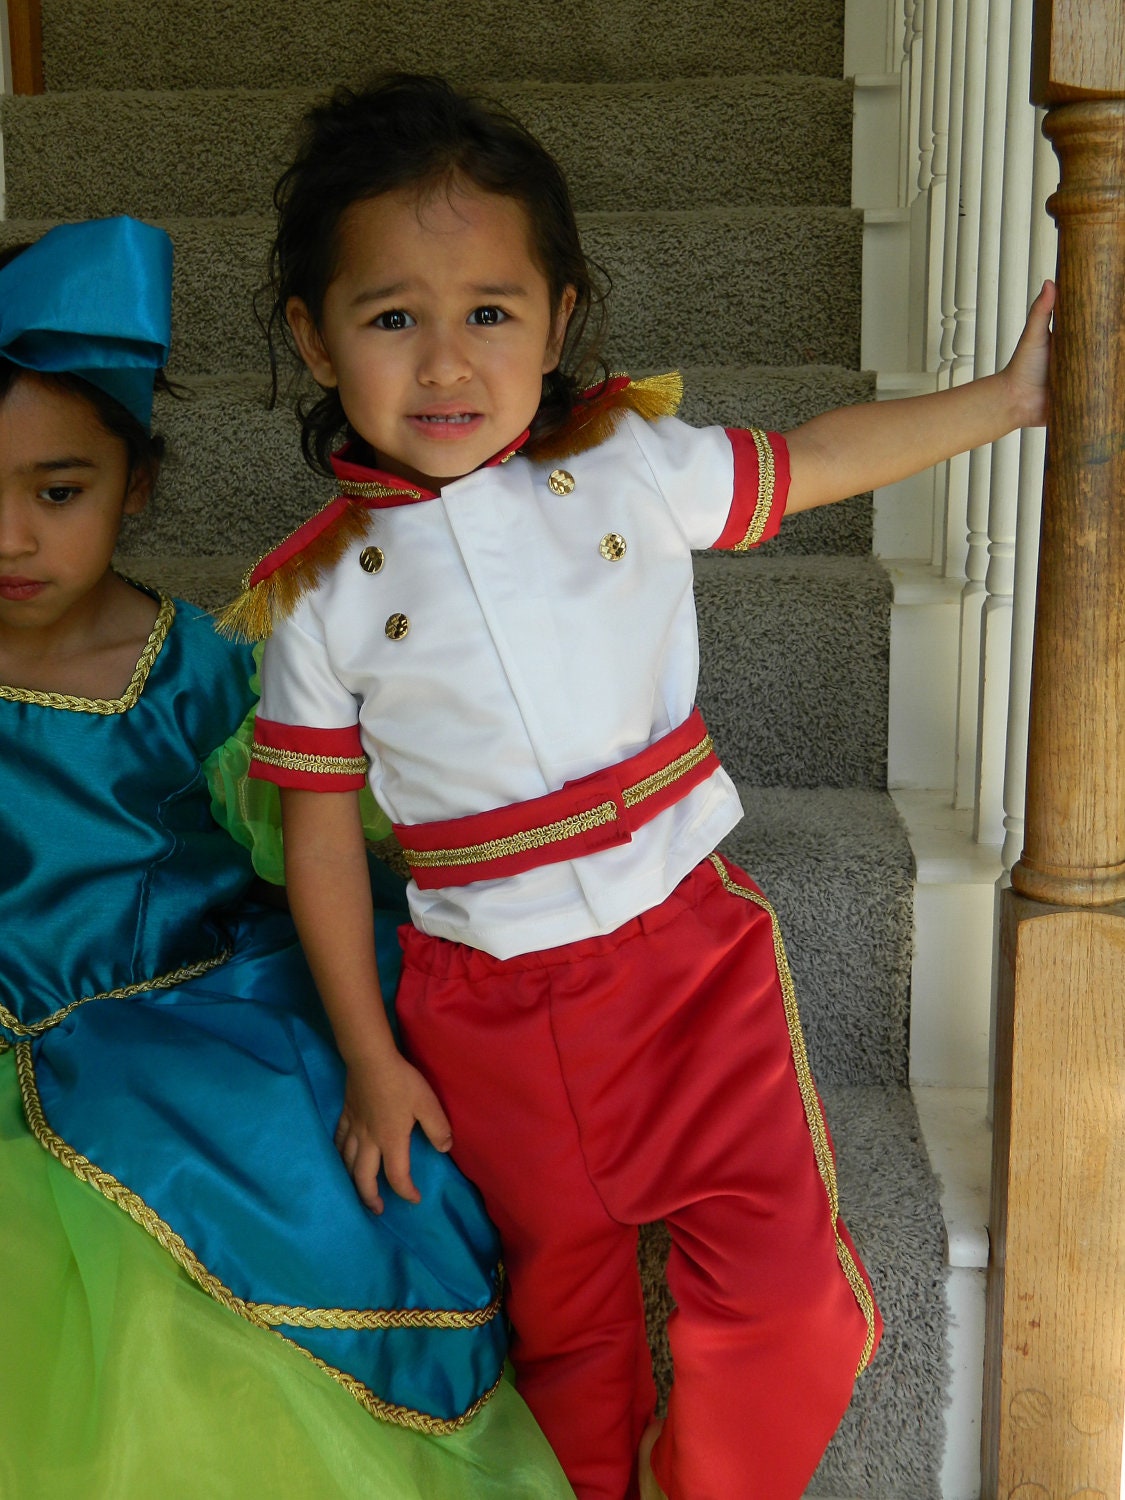 Prince Charming Inspired Costume from Cinderella Fairytale